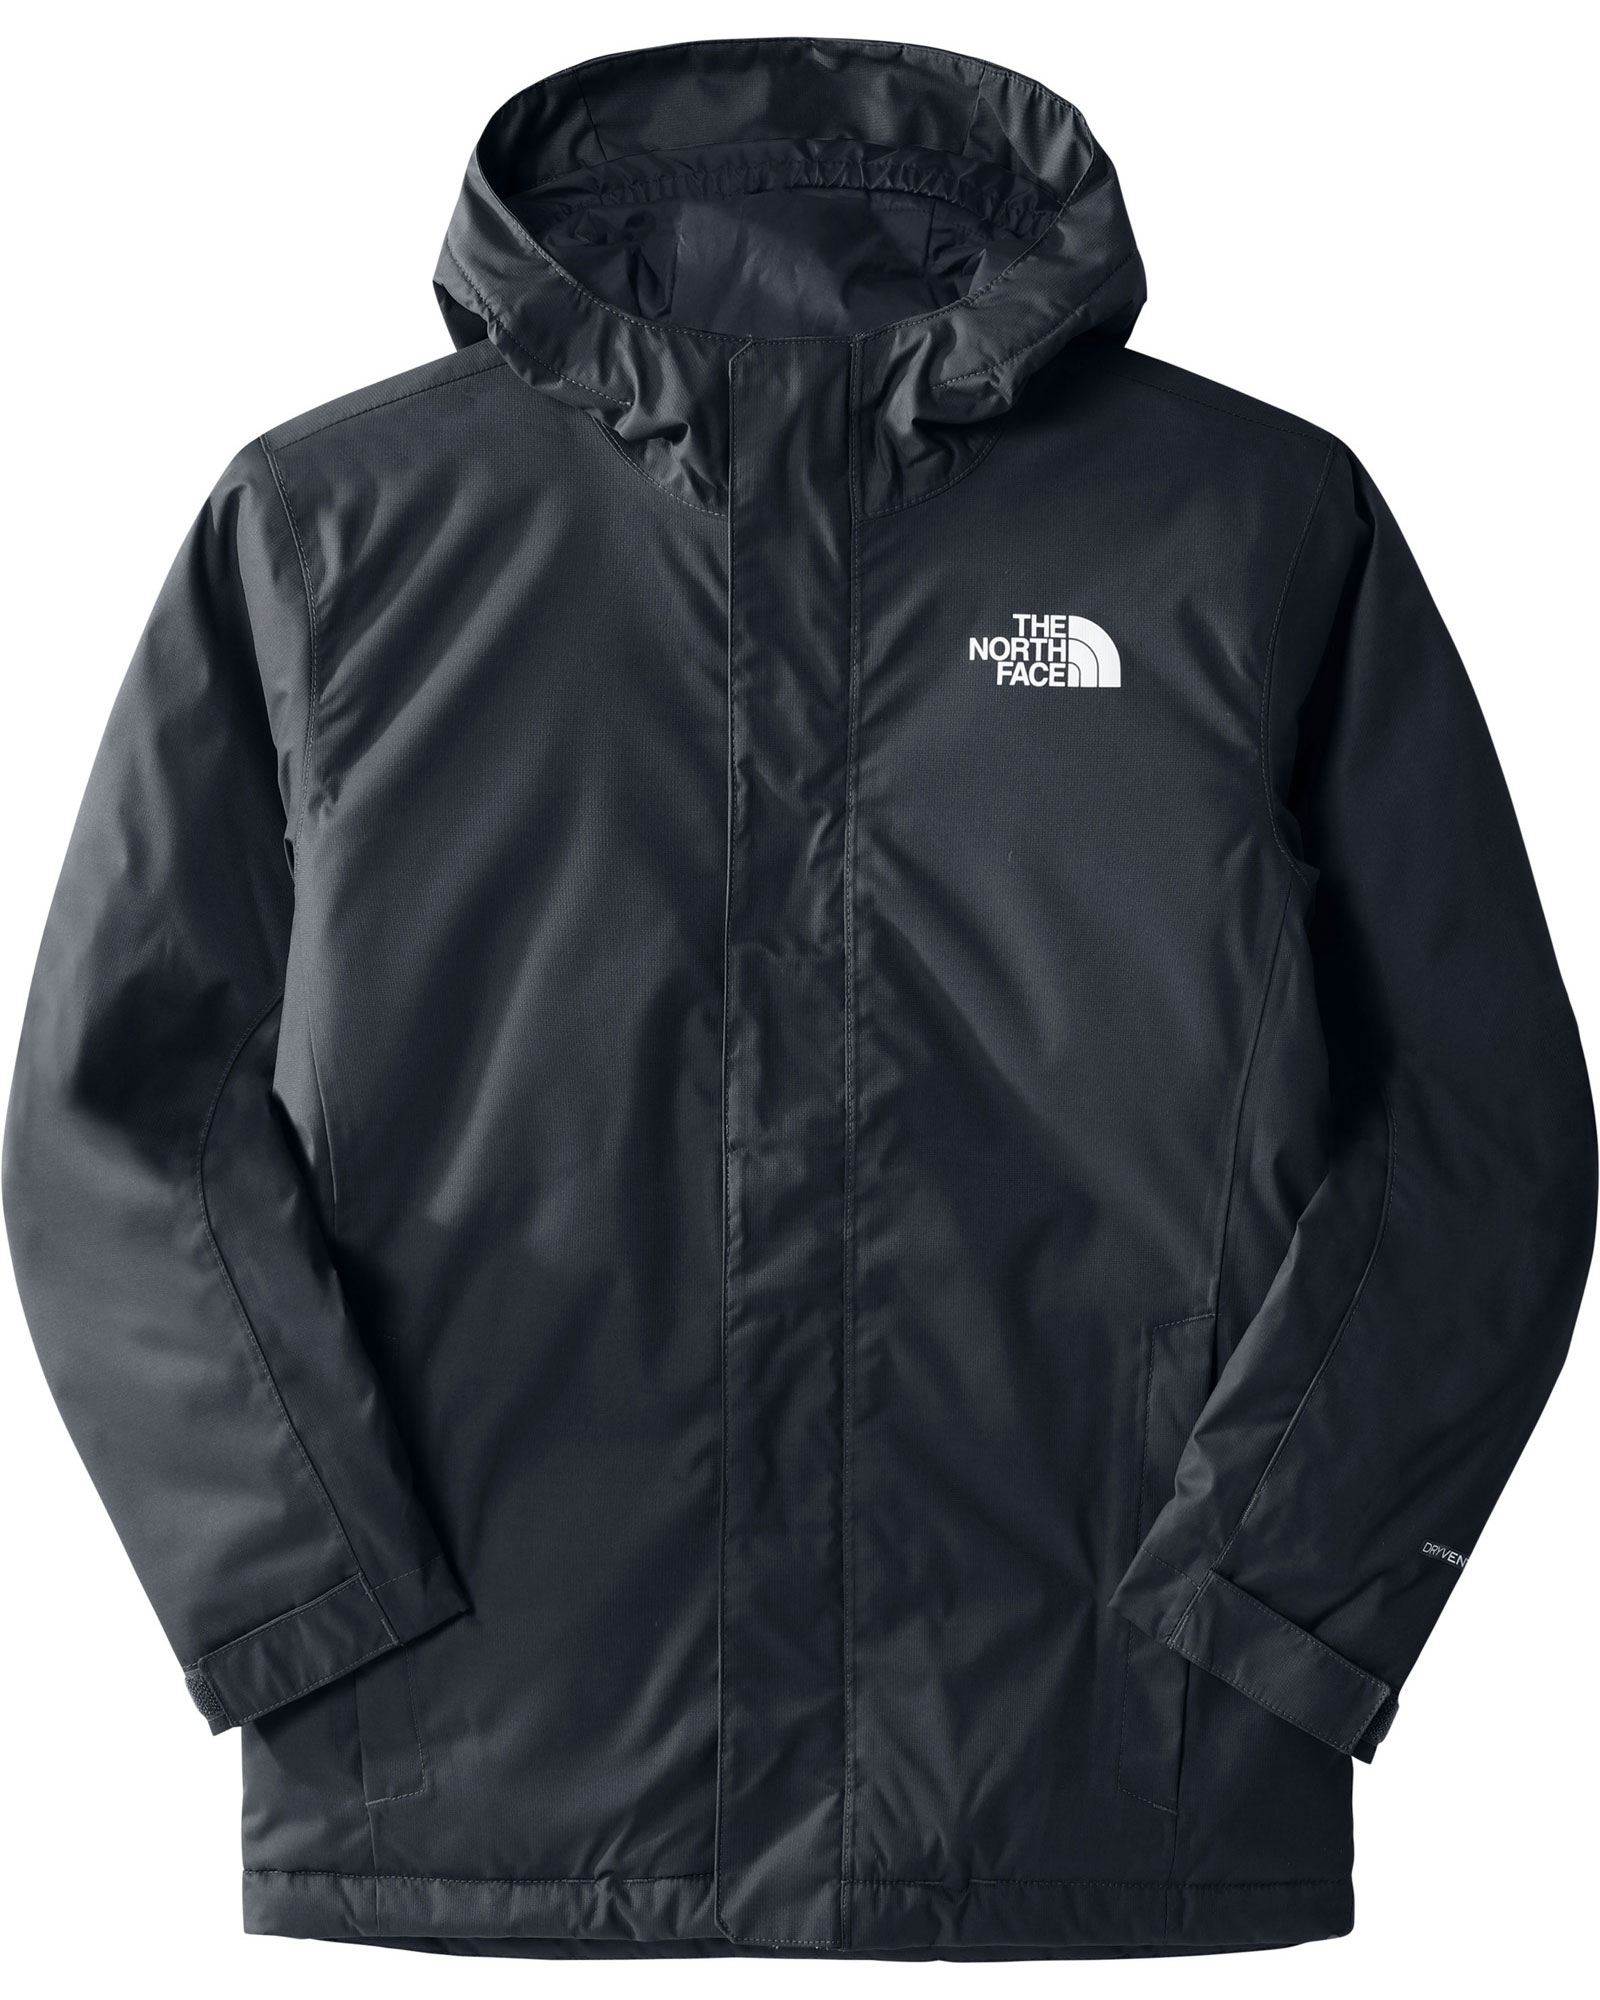 The North Face Youth Snowquest DryVent Jacket | Ellis Brigham